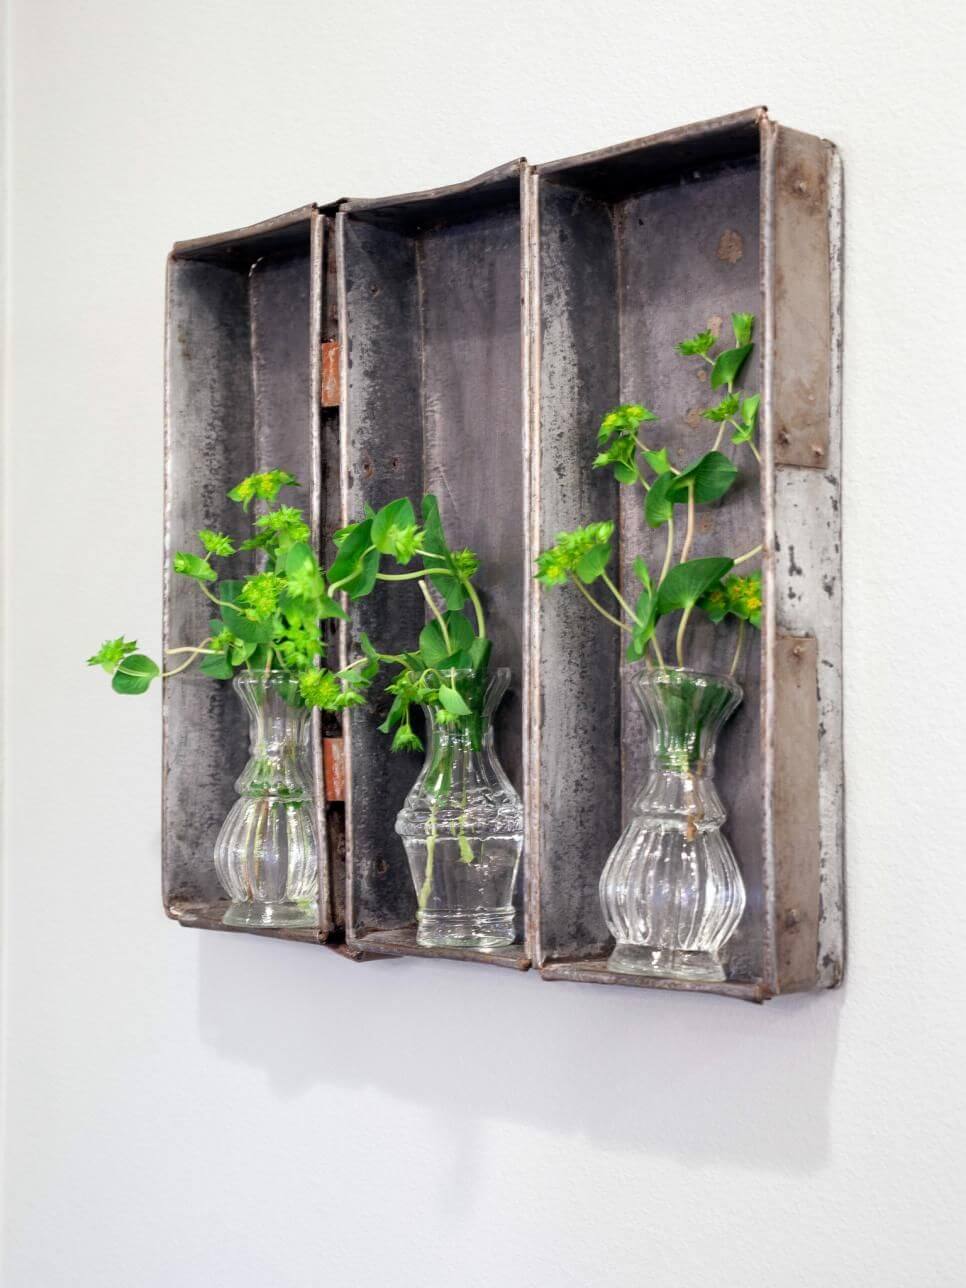 Old Metal Trays with Little Glass Vases Inside